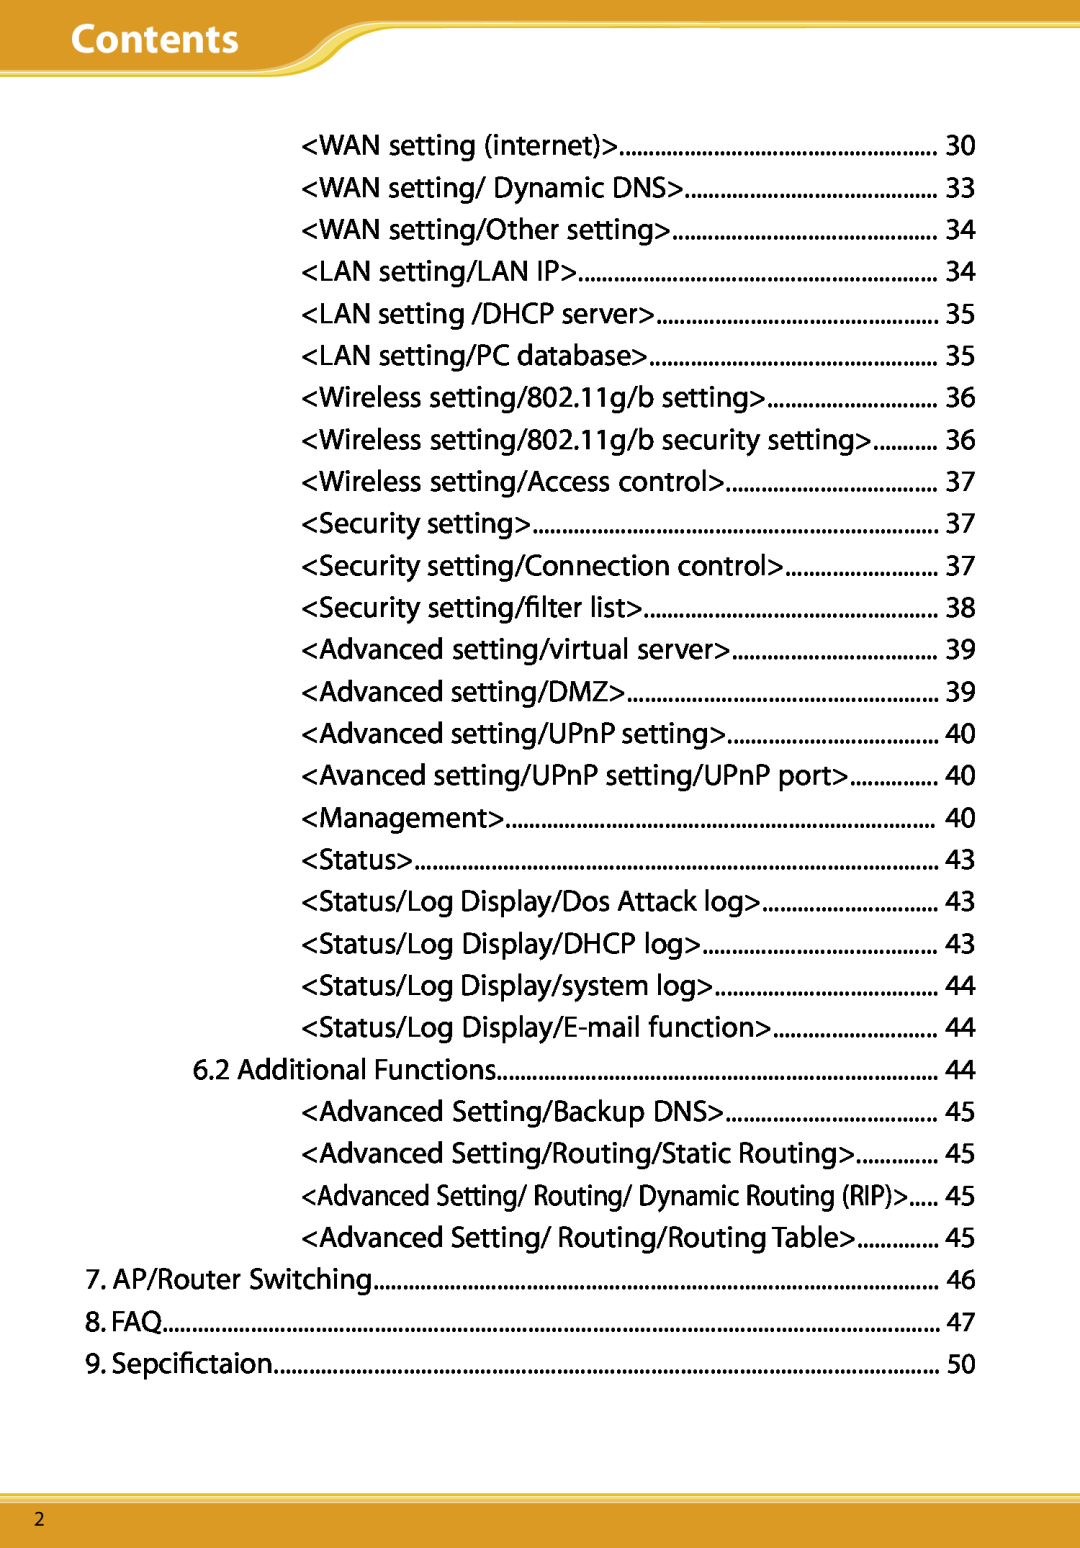 Allied Telesis CG-WLBARGS manual Wireless setting/802.11g/b security setting, Security setting/Connection control 